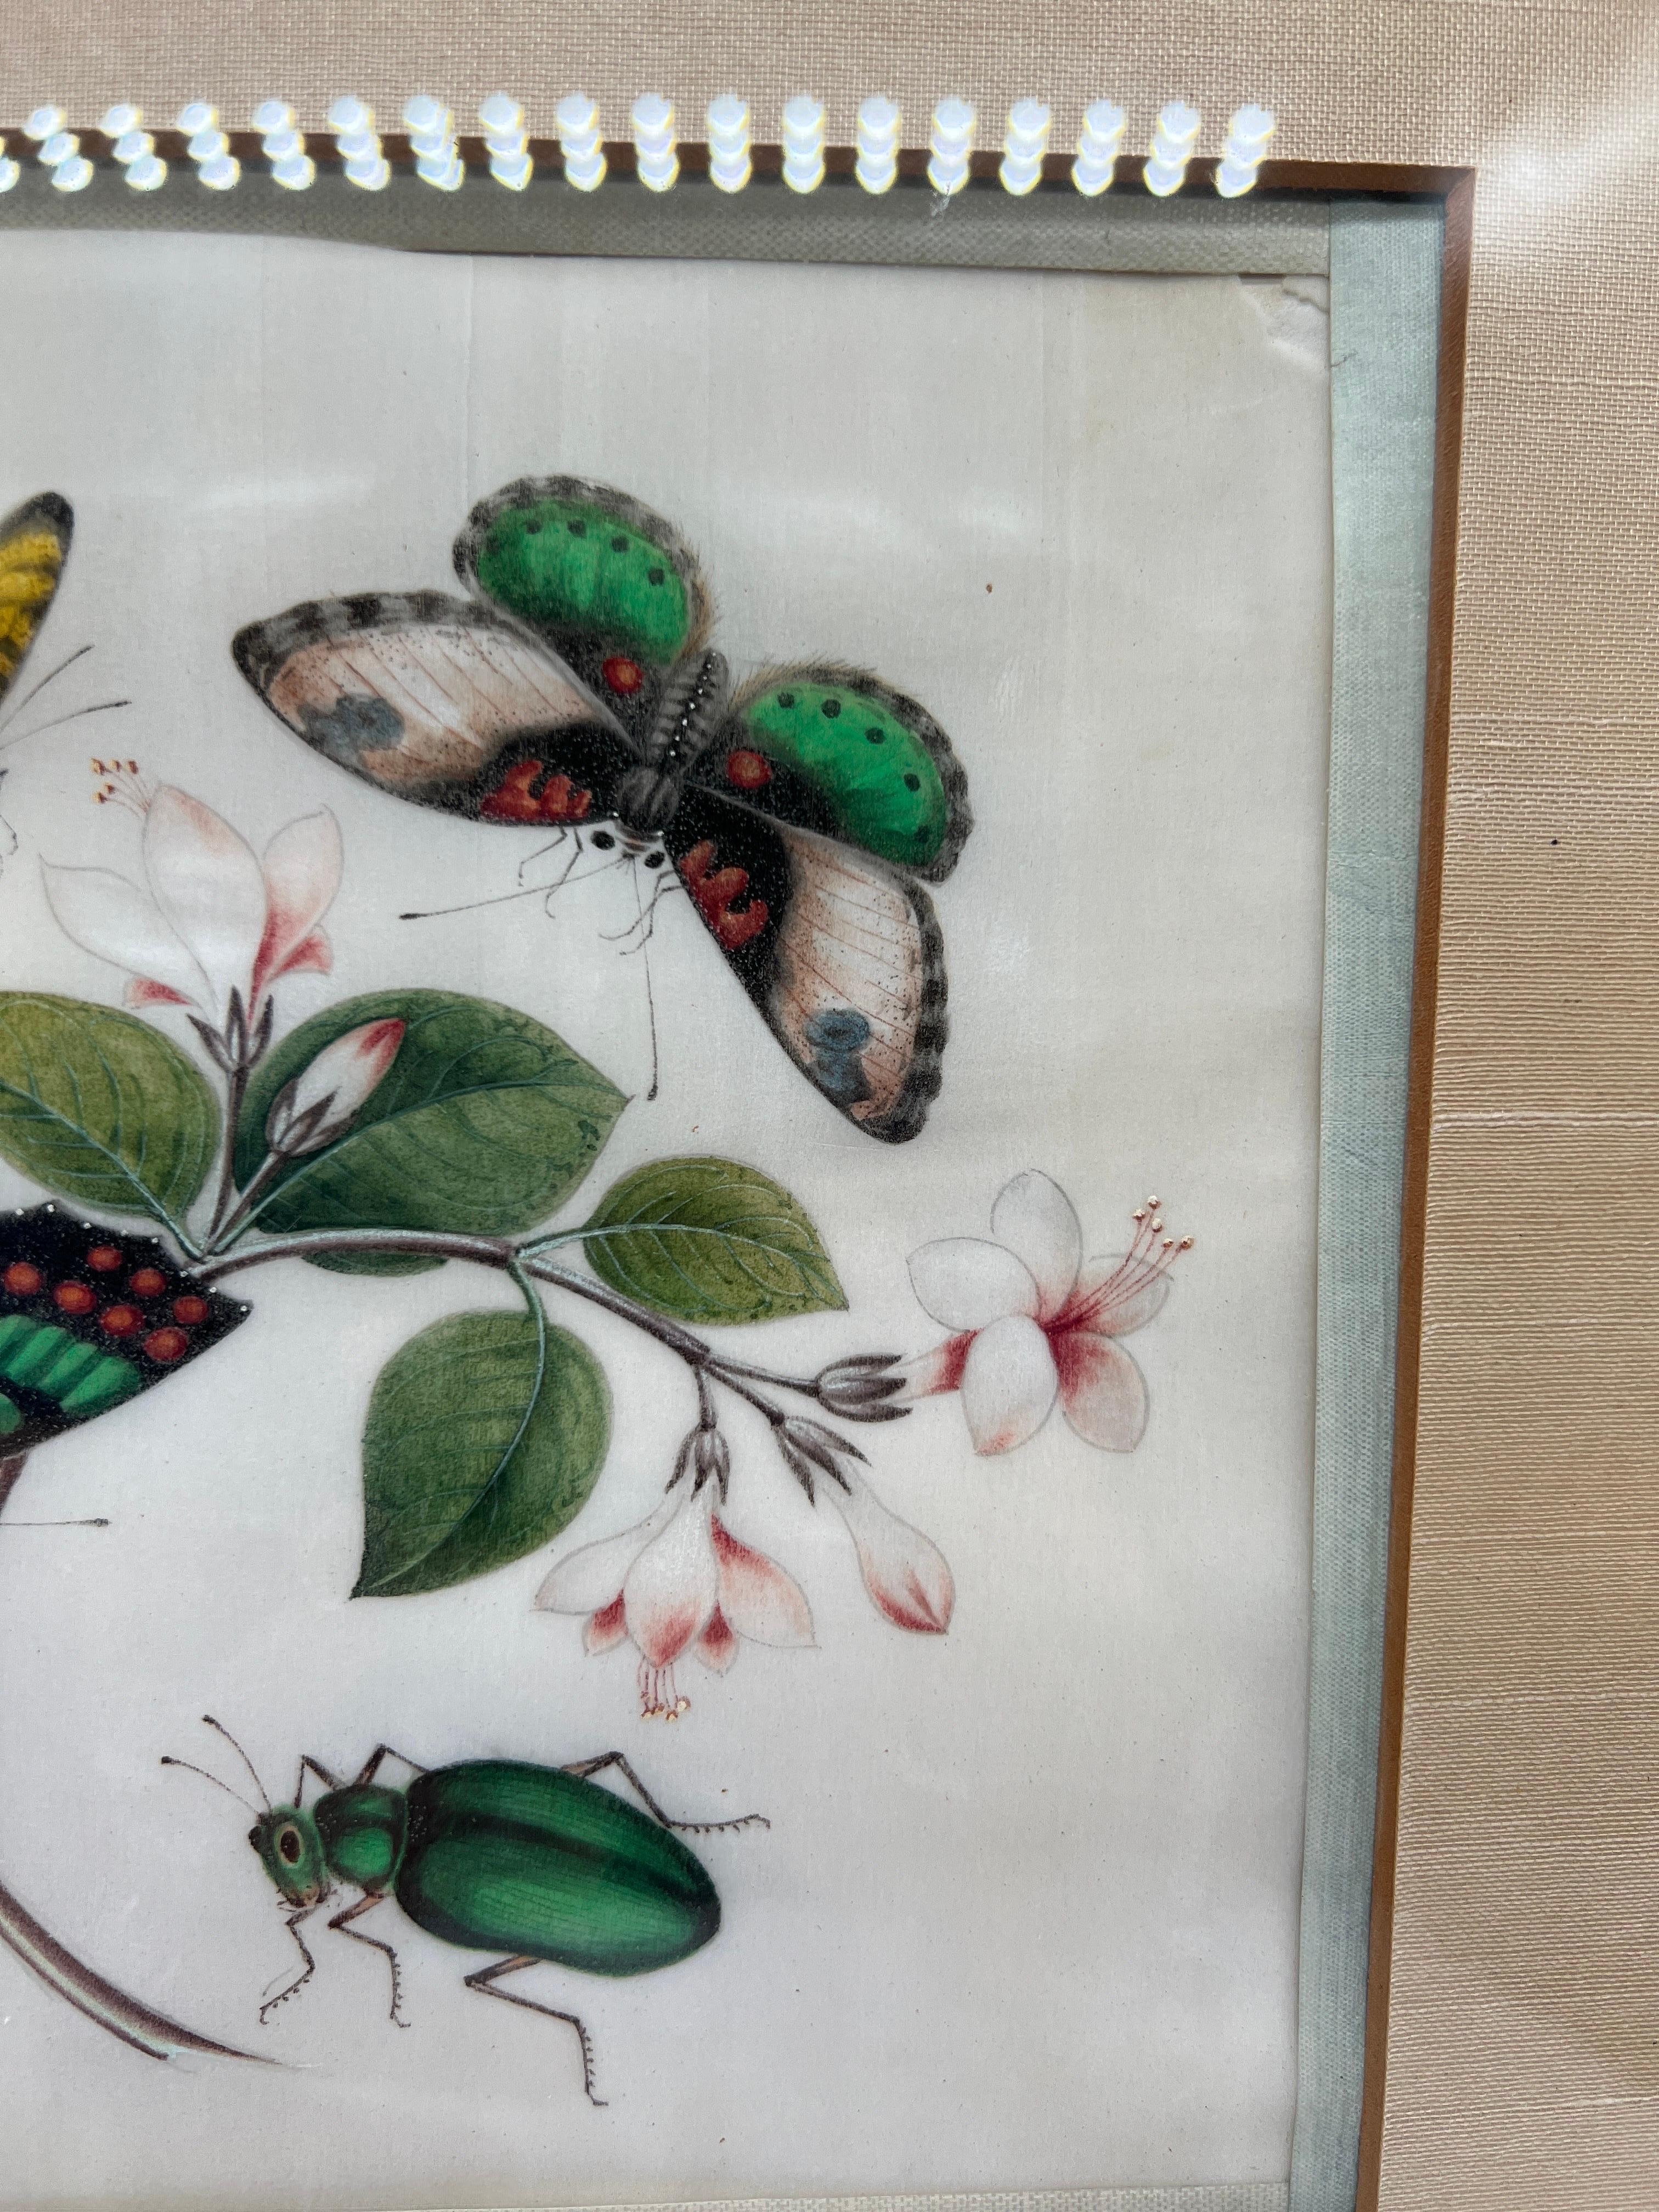 Chinois Butterfly & Insect Pith, aquarelle d'exportation chinoise du 19e siècle  en vente